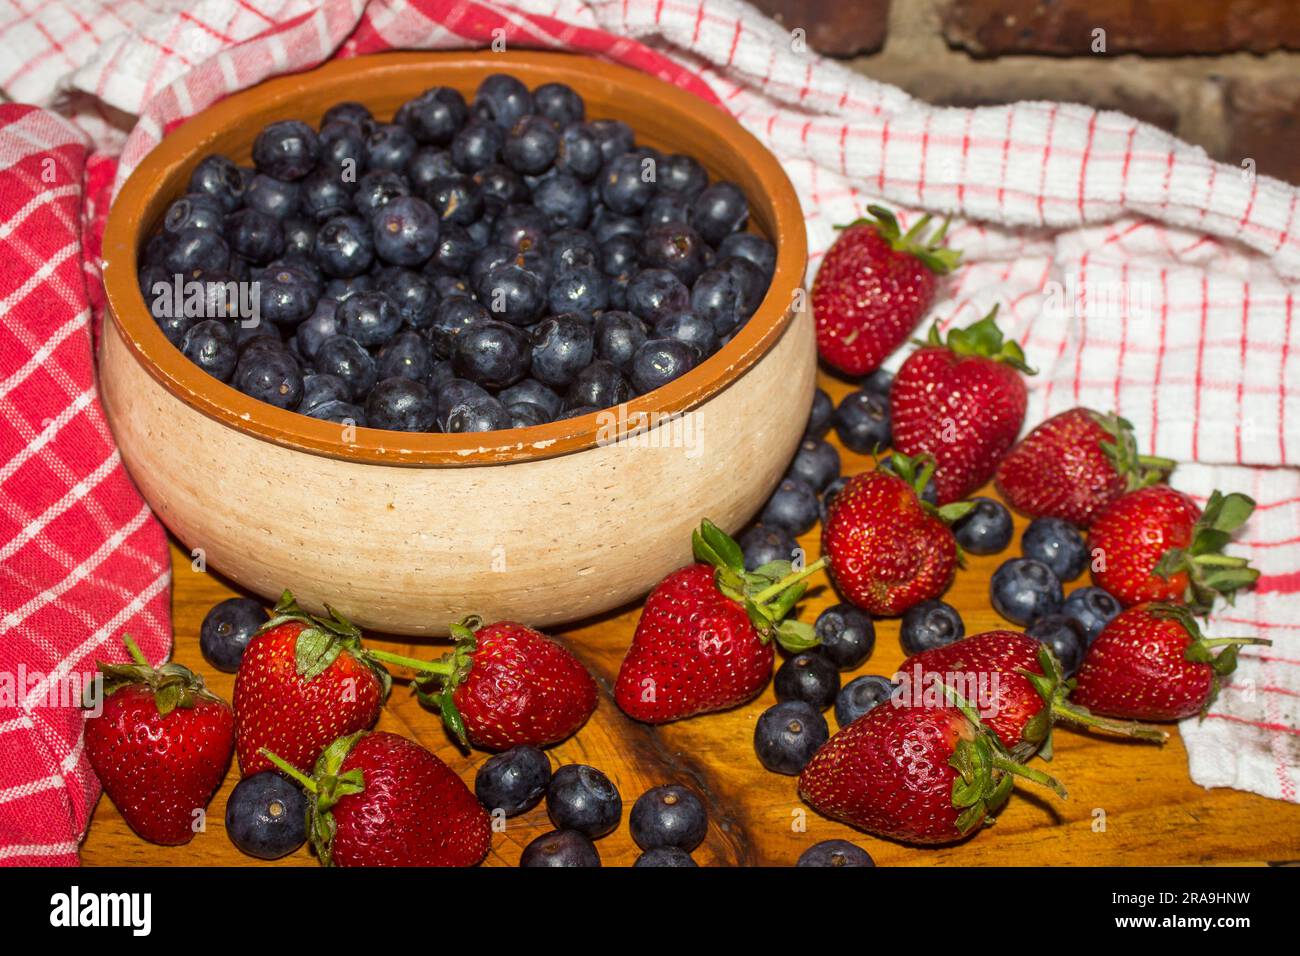 Bowl filled with blueberries surrounded by strawberries and blueberries Stock Photo